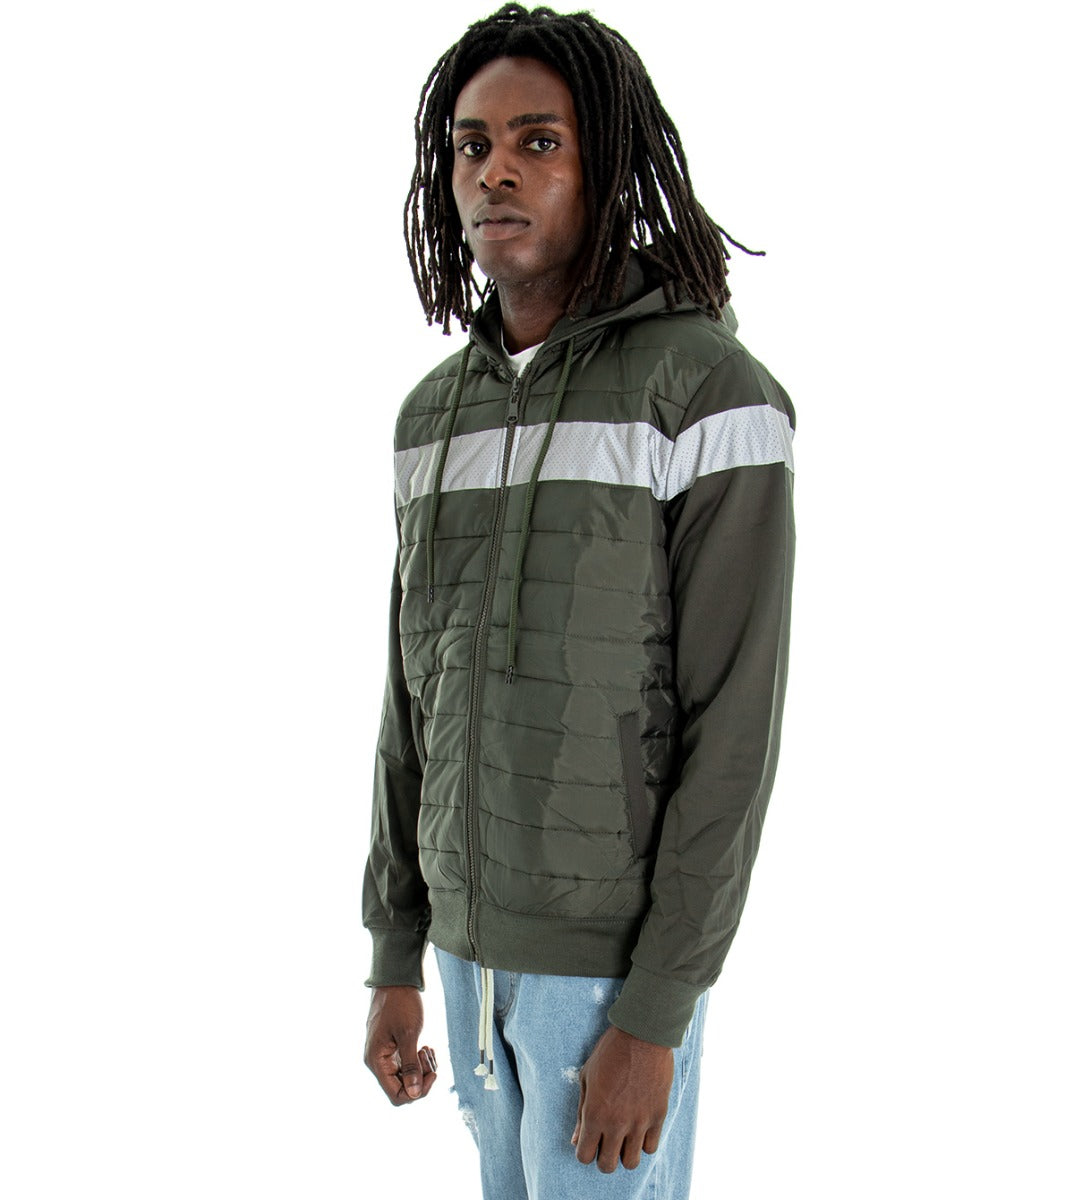 Men's Long Sleeves Bomber Jacket with Hood Solid Color Green Stripe GIOSAL